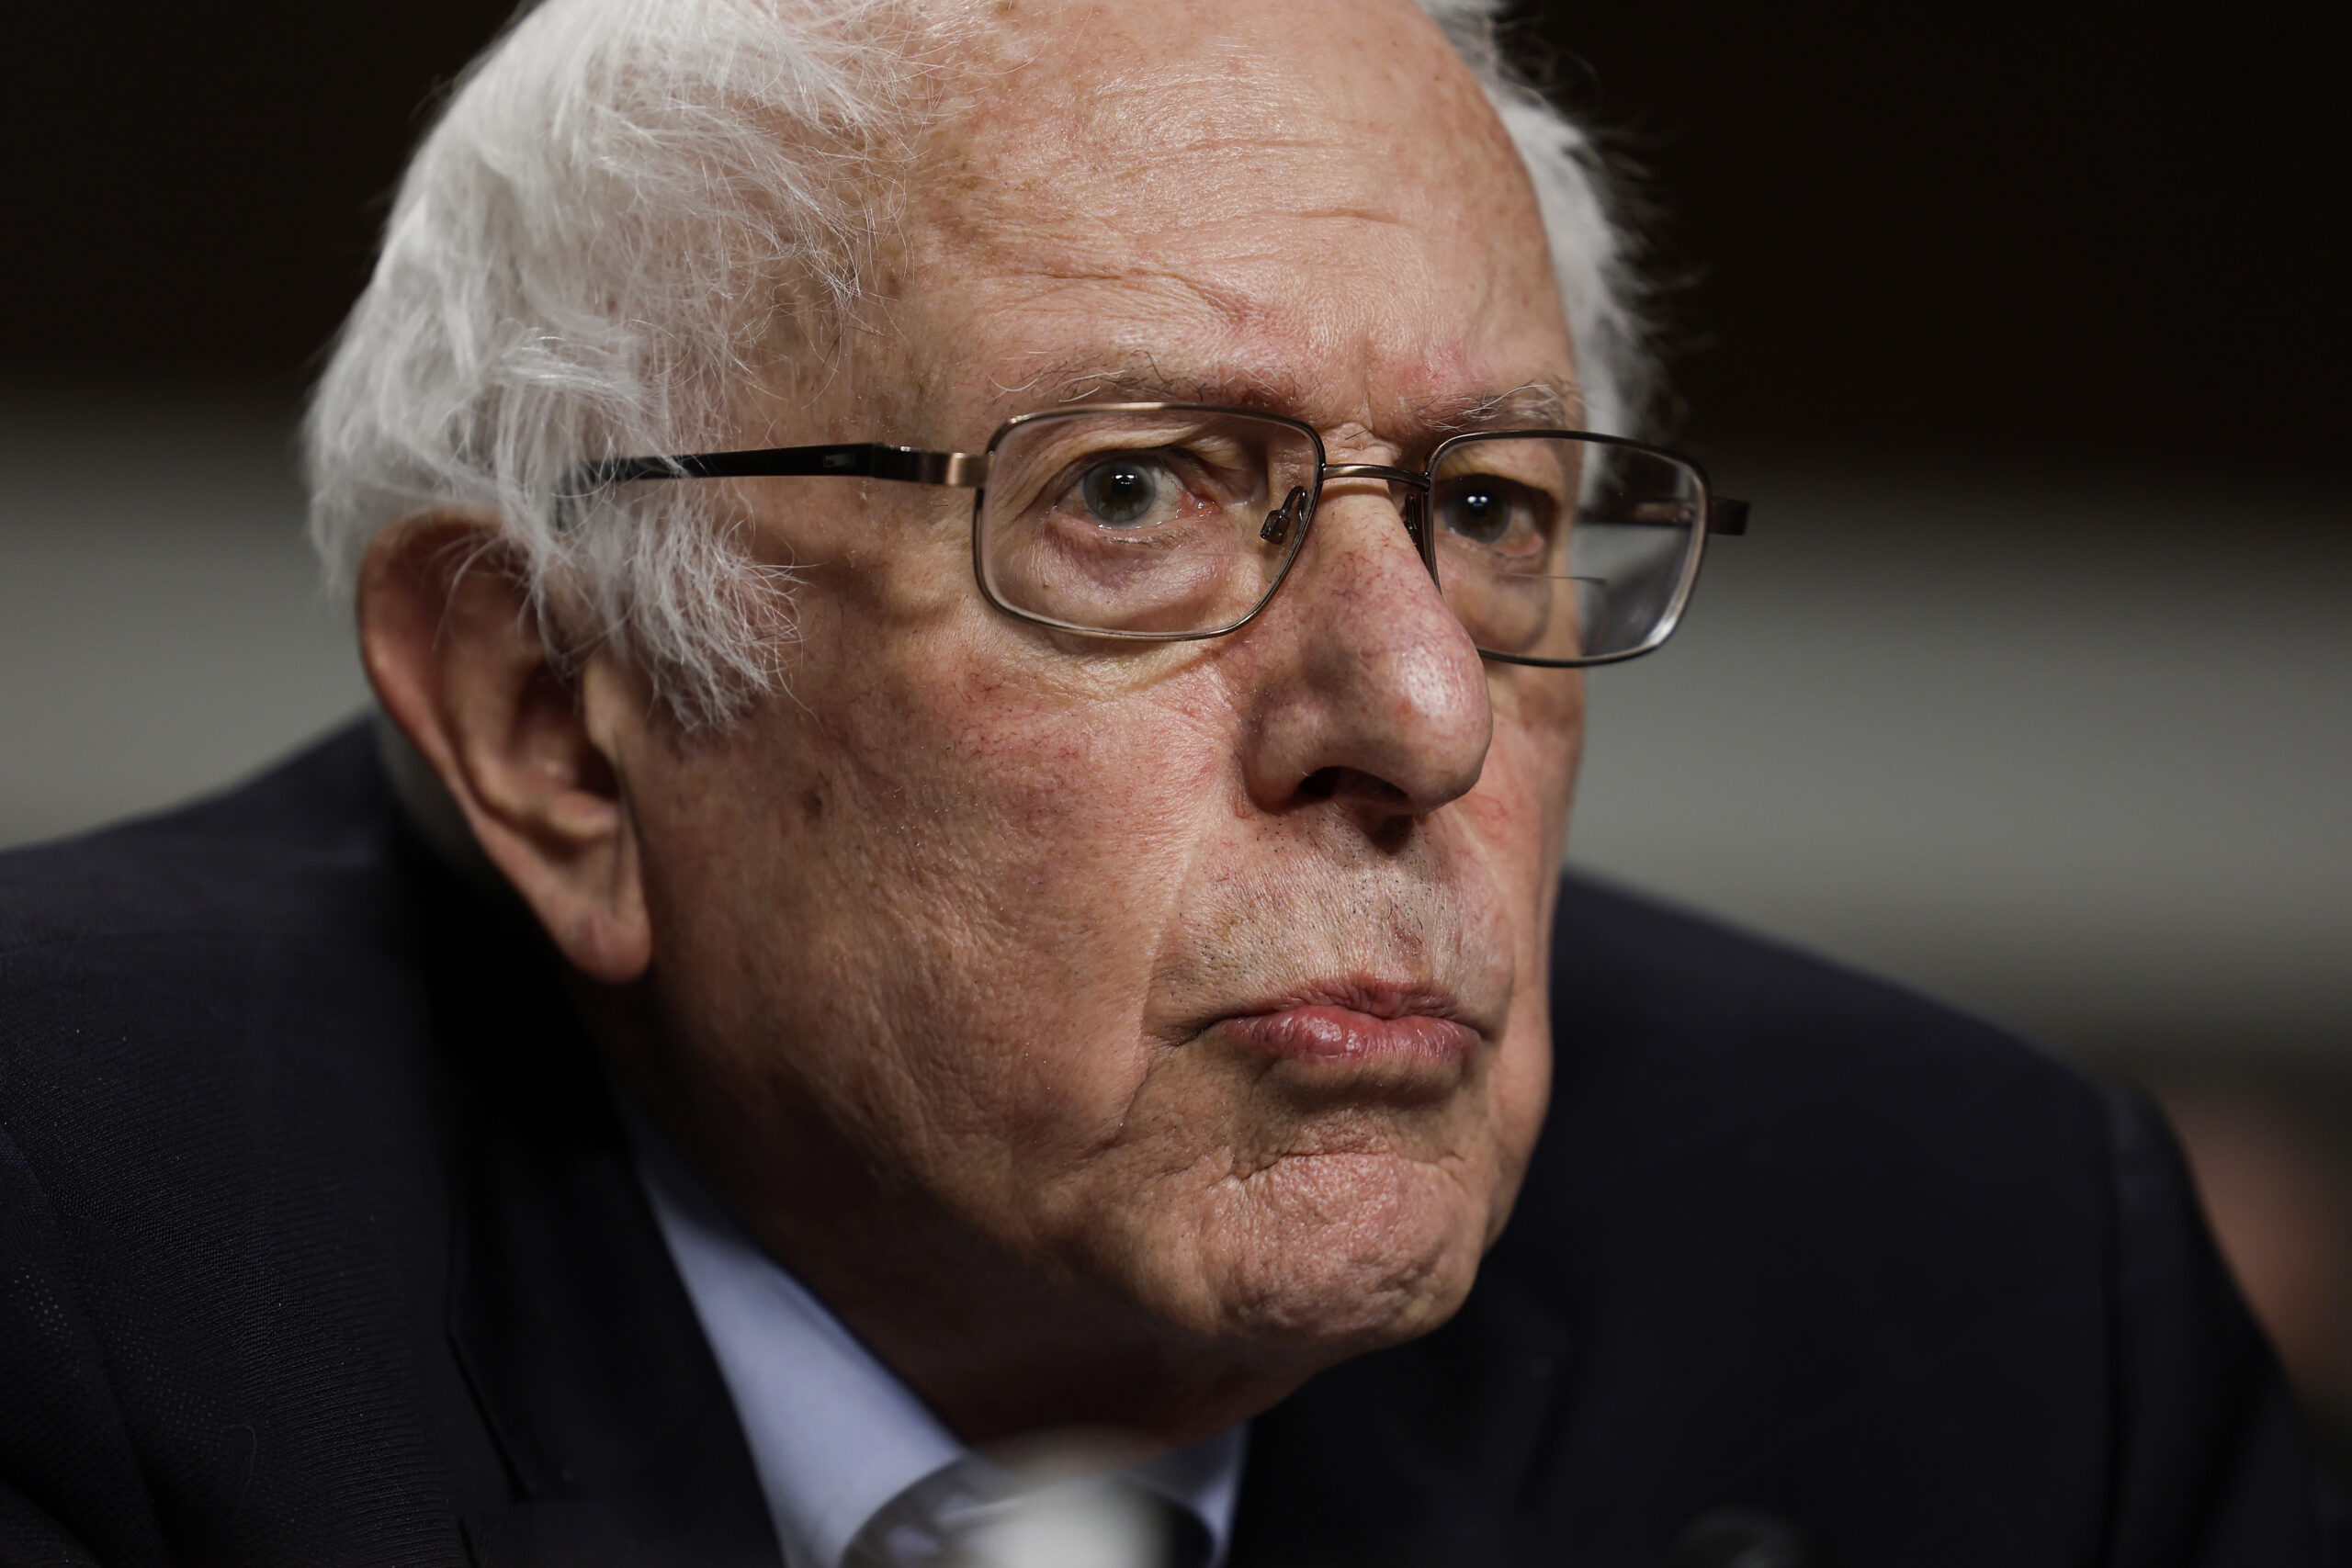 The Democratic party has rejected Bernie Sanders' methods of pressuring drug companies on pricing in their nomination for the National Institutes of Health.